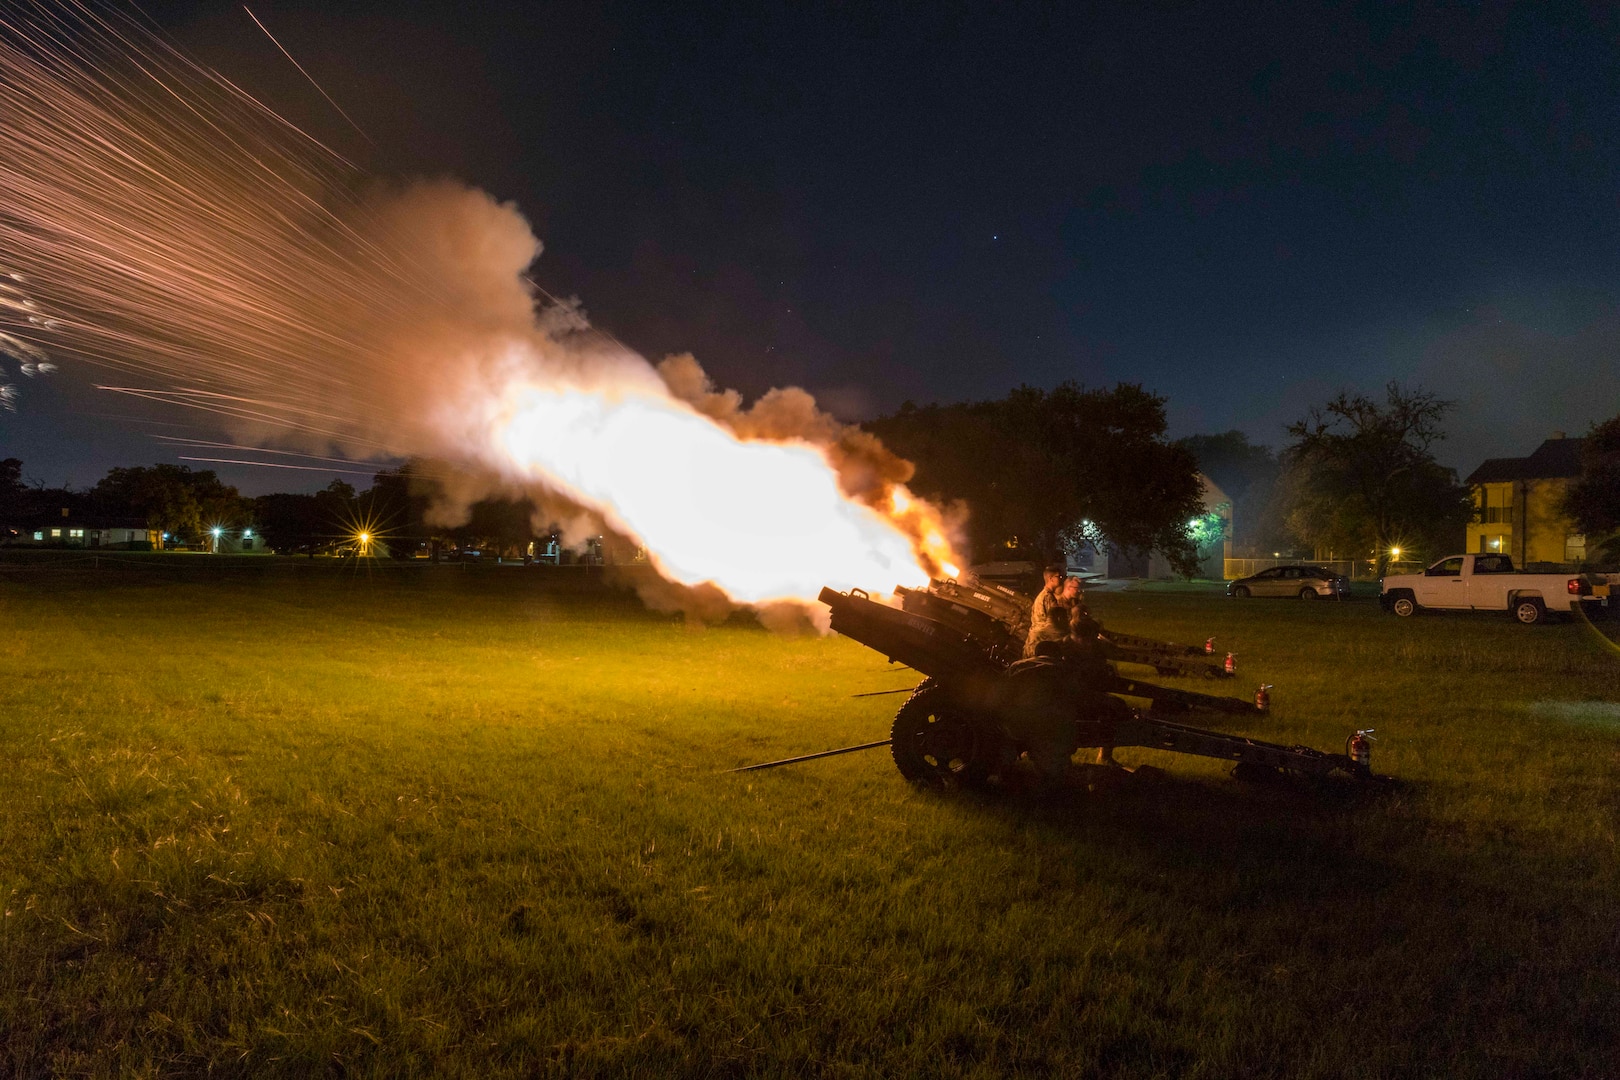 The Fort Sam Houston Honor Guard members fire cannons during the annual Military Appreciation Weekend May 6, 2017 at Joint Base San Antonio-Fort Sam Houston, Texas. U.S. U.S. Army North and JBSA hosted the two-day event, which featured music, family activities, and various military demonstrations. This year, the appreciation weekend also commemorated the 300th anniversary for the city of San Antonio. (U.S. Air Force photo by Ismael Ortega / Released)